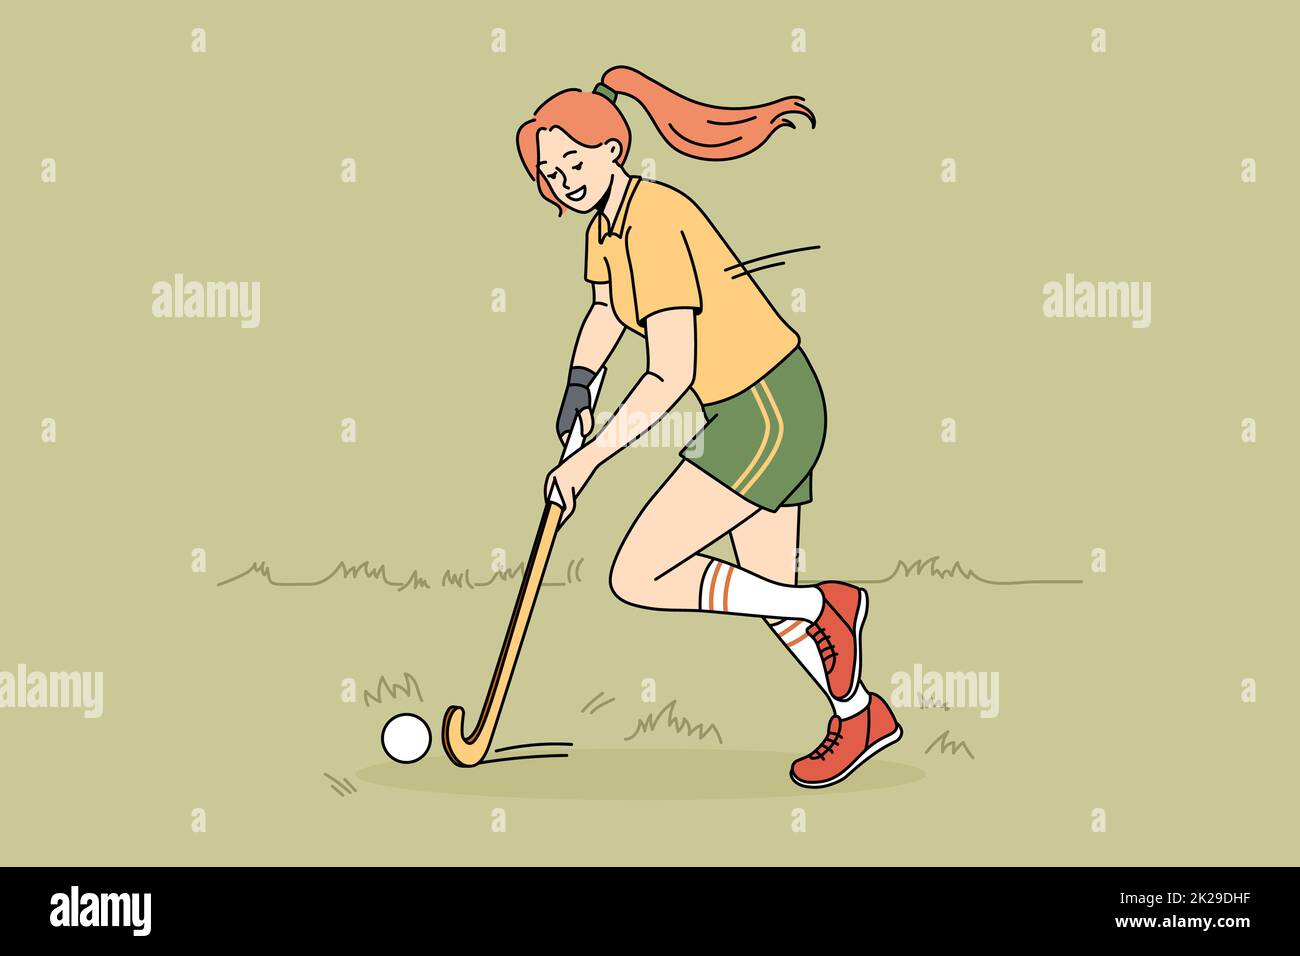 Playing golf and sport concept Stock Photo